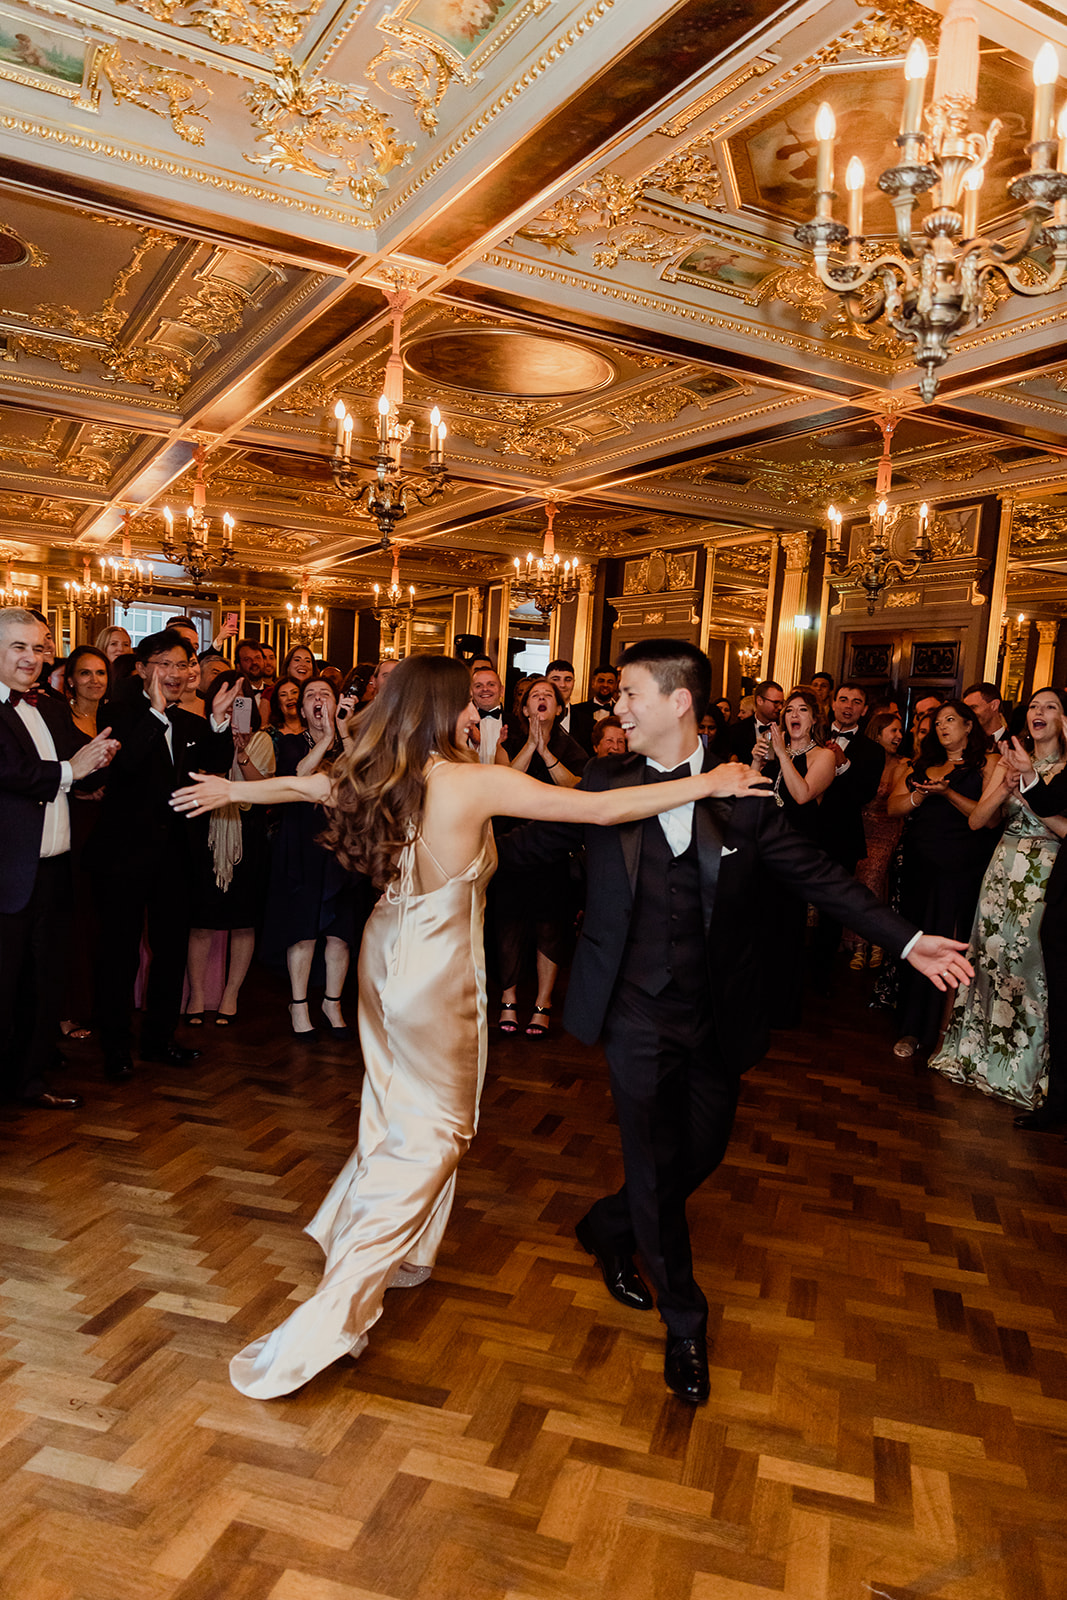 couple dancing at the reception at the wedding reception at Cafe Royal Hotel in London